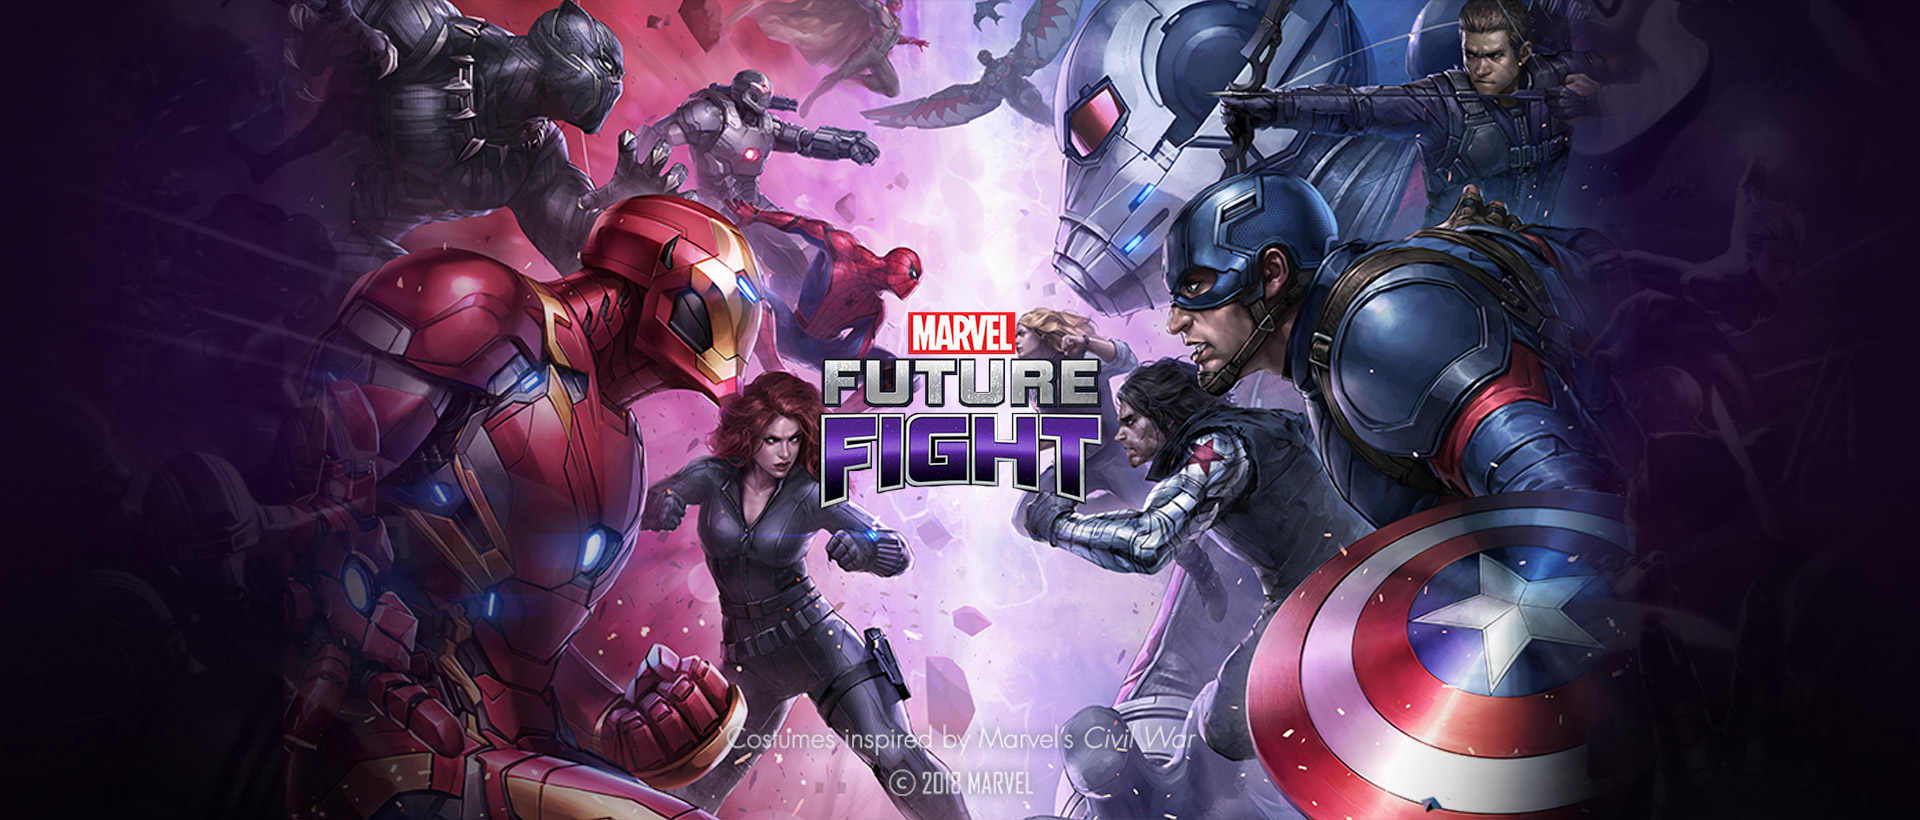 Download MARVEL Future Fight on PC with NoxPlayer Appcenter